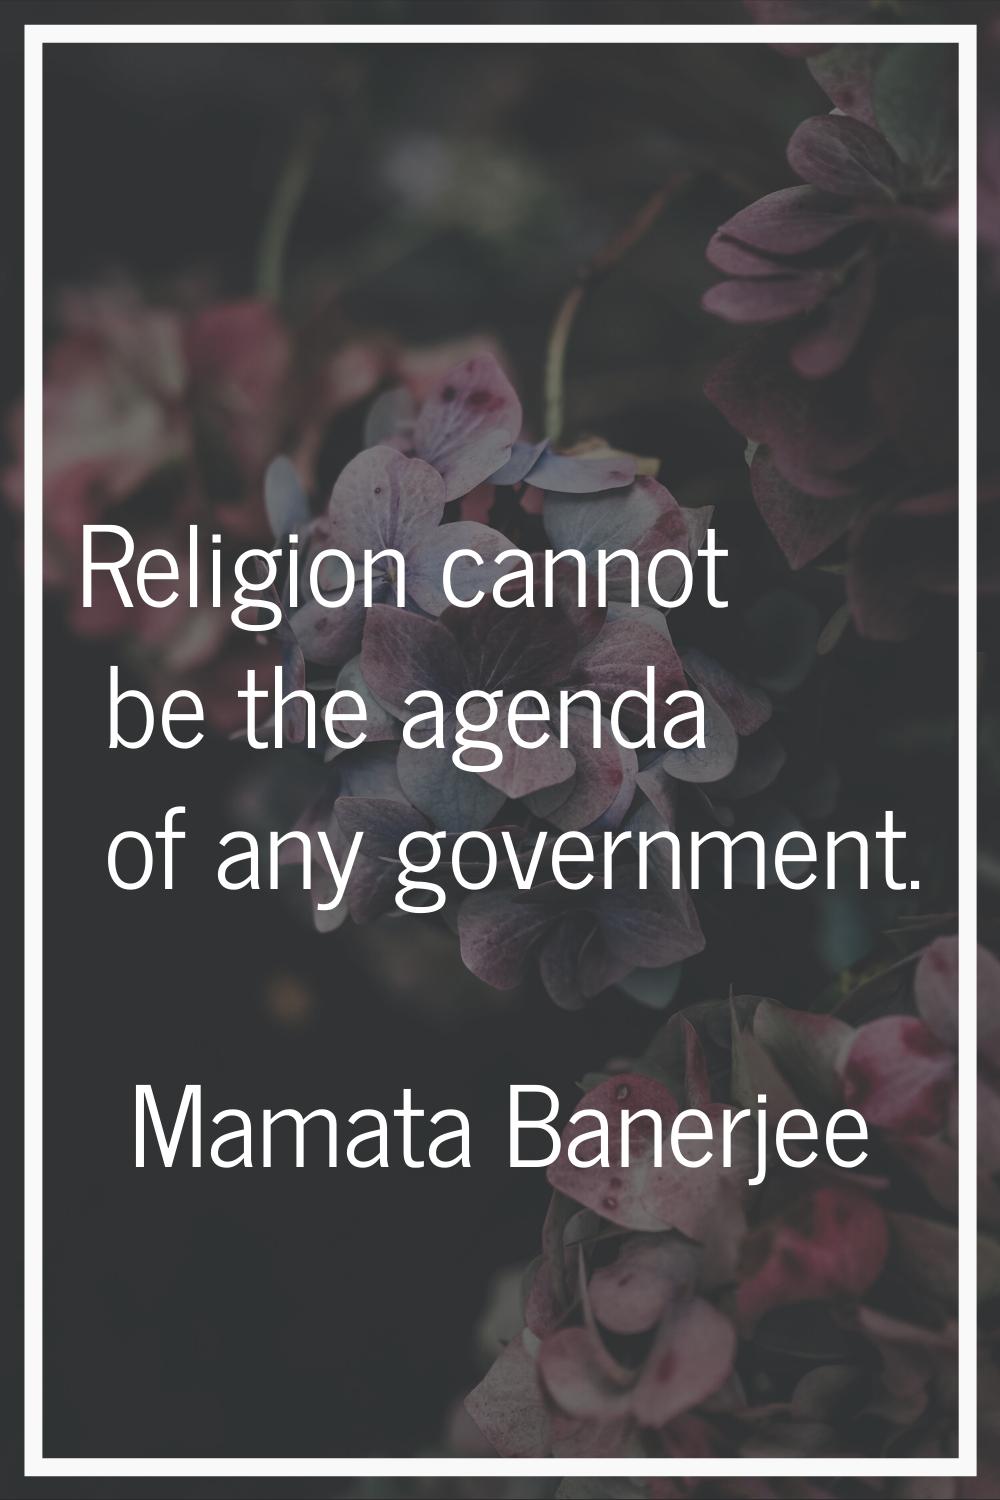 Religion cannot be the agenda of any government.